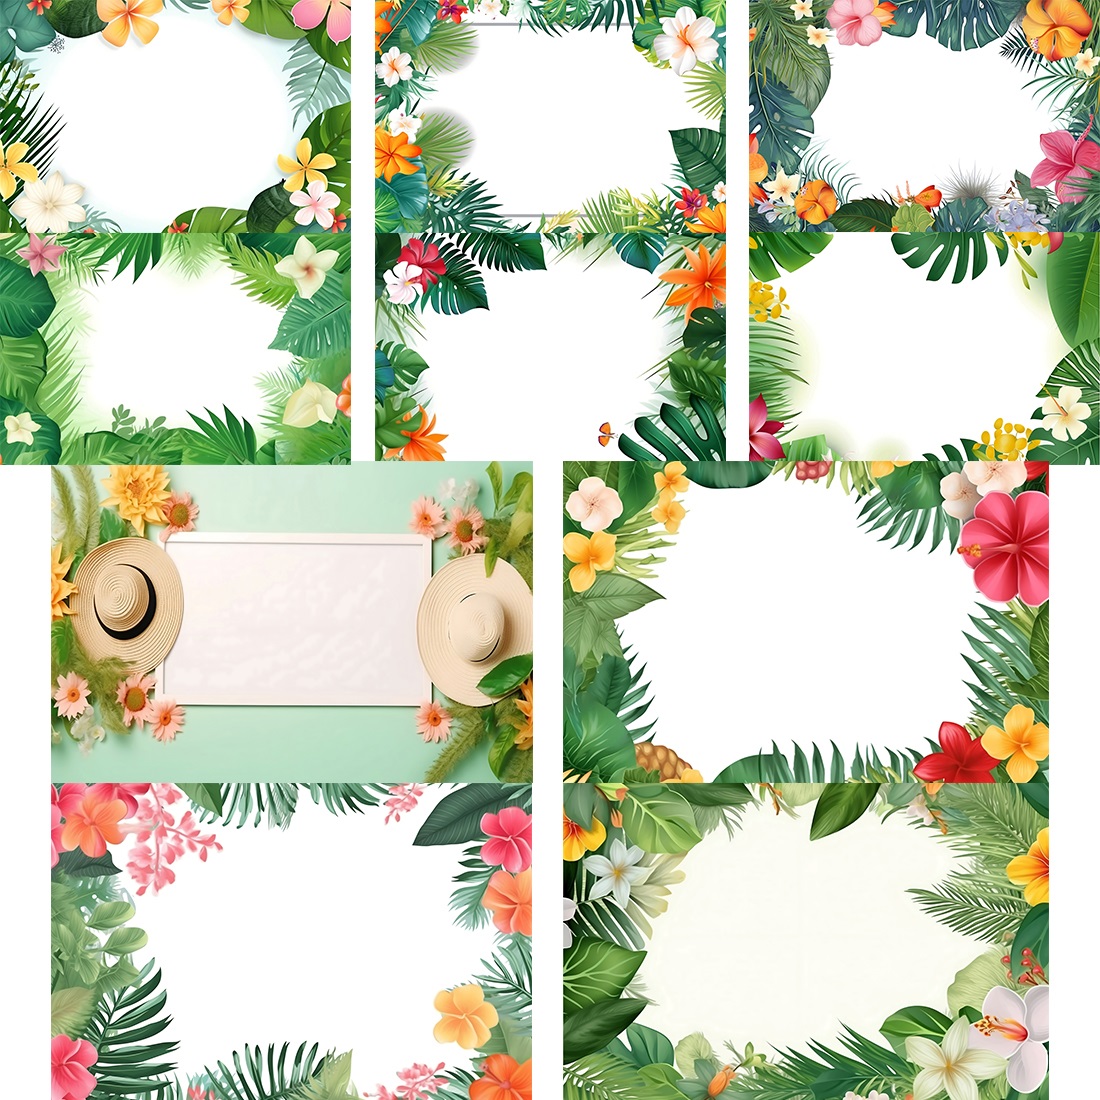 Summer Frame or Border with tropical palm leaves and flowers on white background preview image.